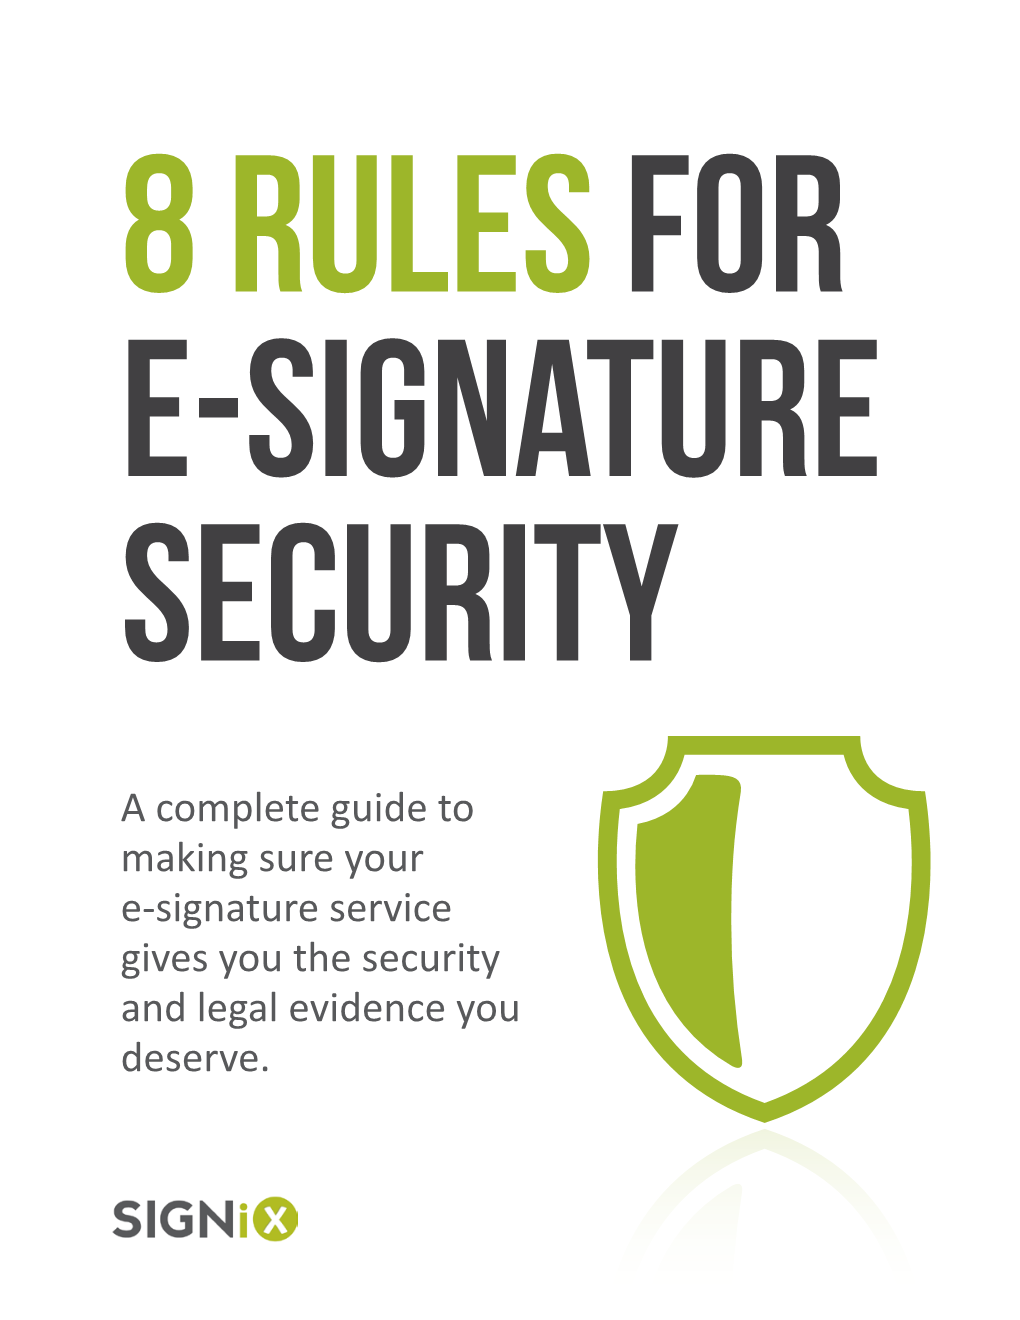 A Complete Guide to Making Sure Your E-Signature Service Gives You the Security and Legal Evidence You Deserve